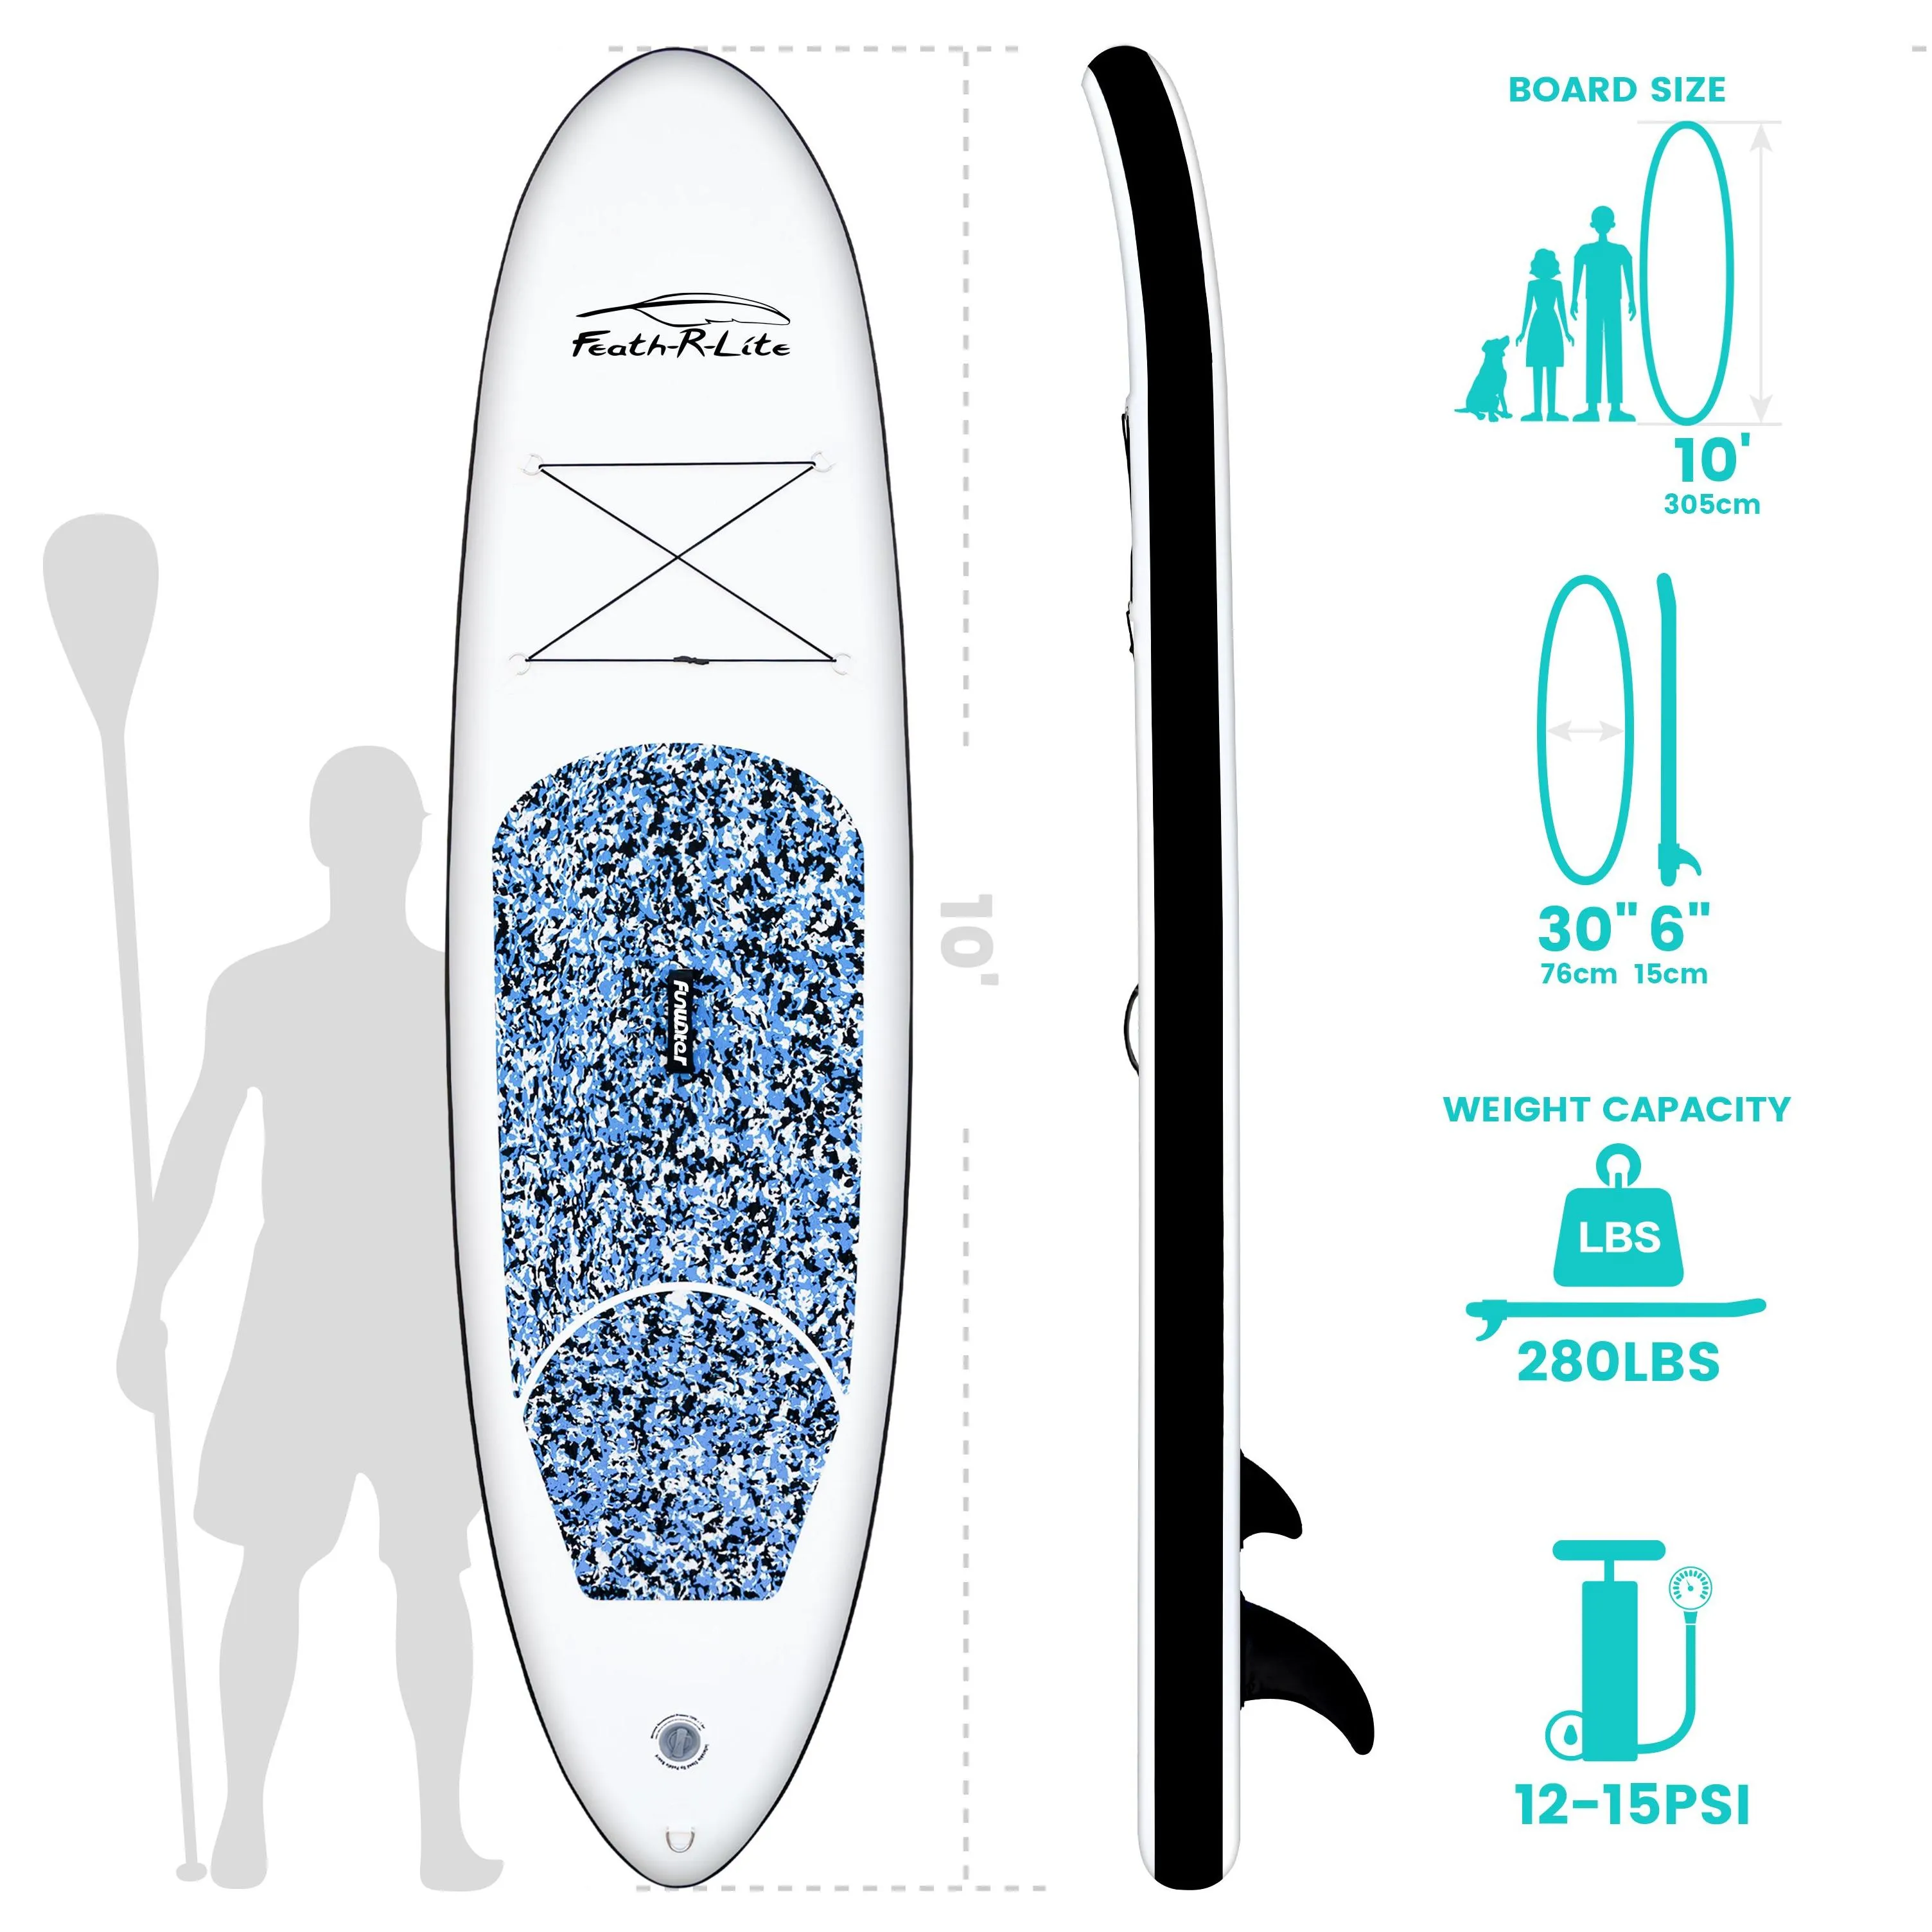 Funwater paddle board surfboard stand up paddleboard inflatable Tabla Surf Wholesale Ca eu warehouses Padel surfboard surfing Sporting